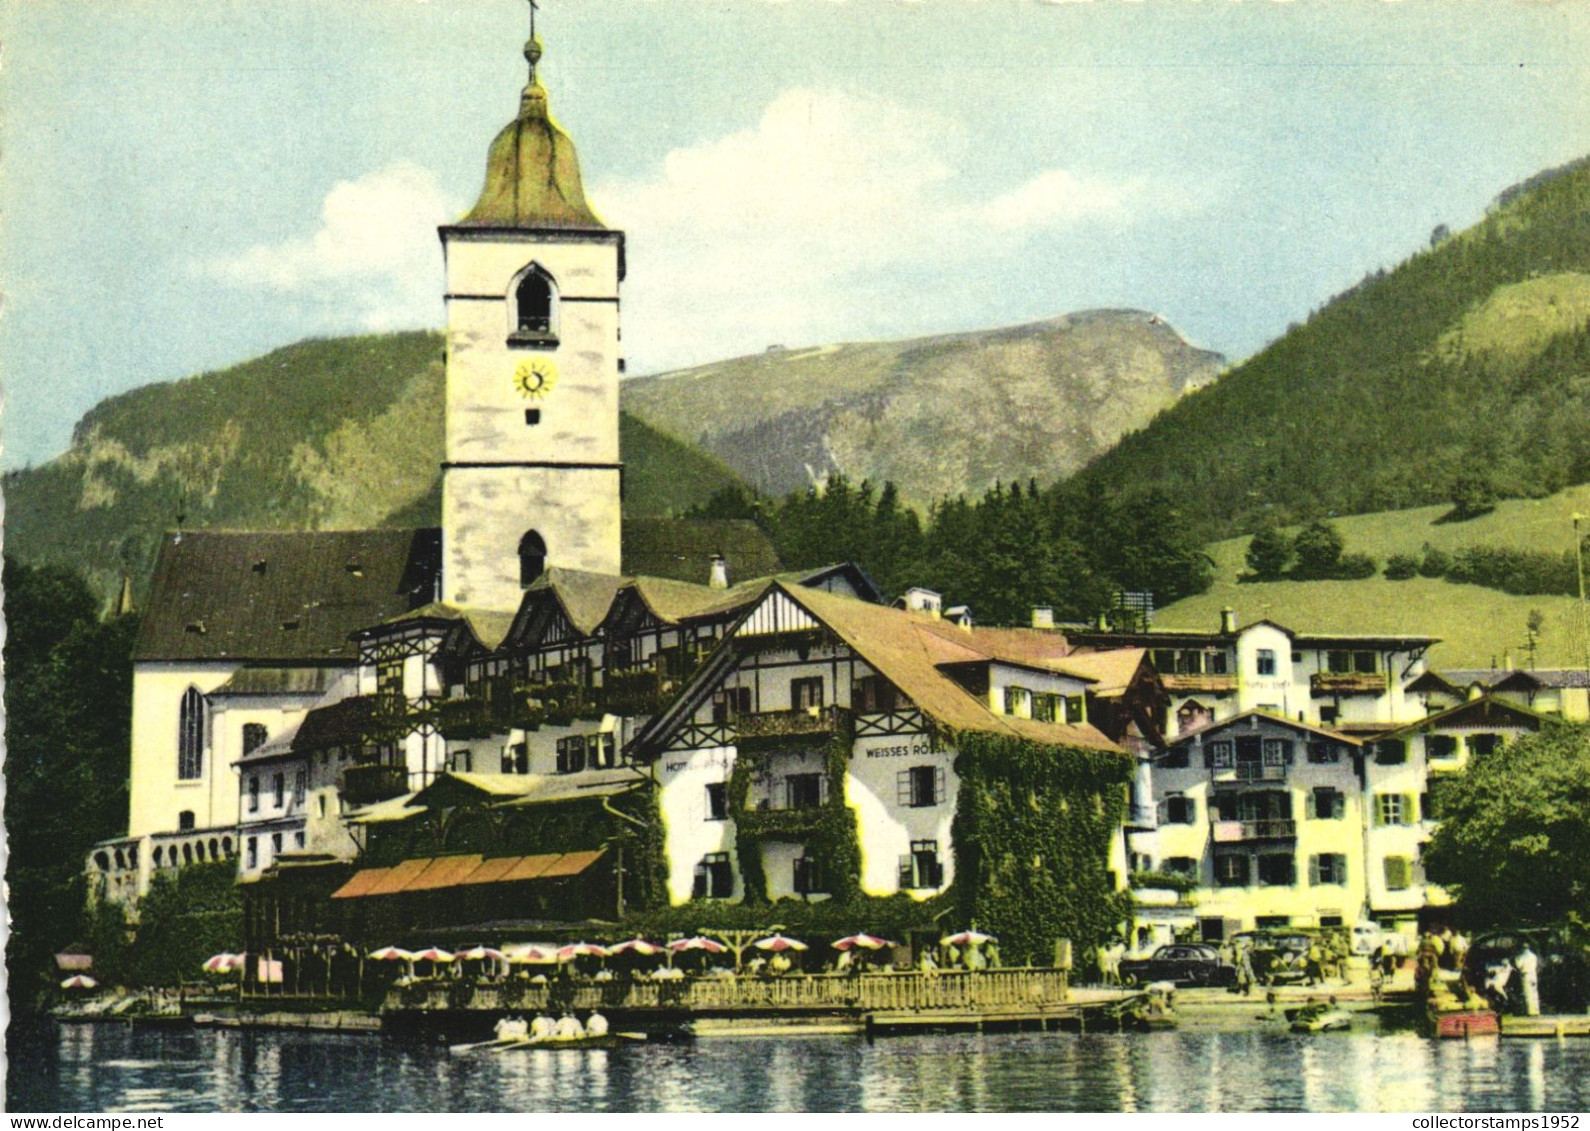 ST WOLFGANG, SCHAFBERG, MOUNTAIN, ARCHITECTURE, HOTEL, CHURCH, TOWER WITH CLOCK, UMBRELLA, BOAT, AUSTRIA, POSTCARD - St. Wolfgang